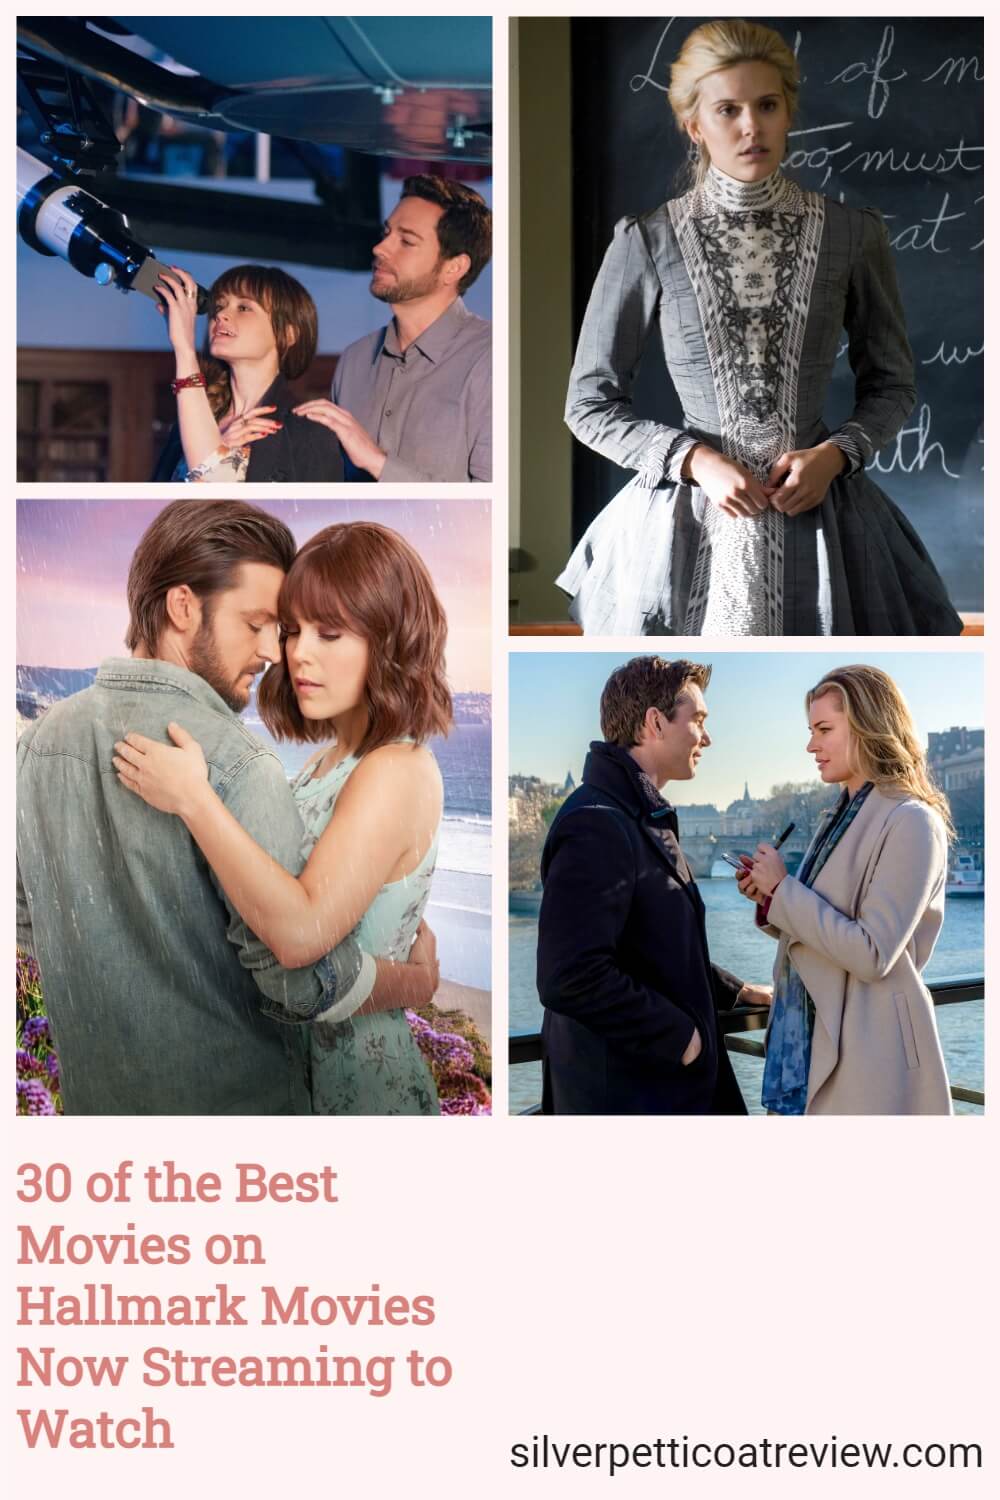 30 of the Best Movies on Hallmark Movies Now Streaming to Watch The